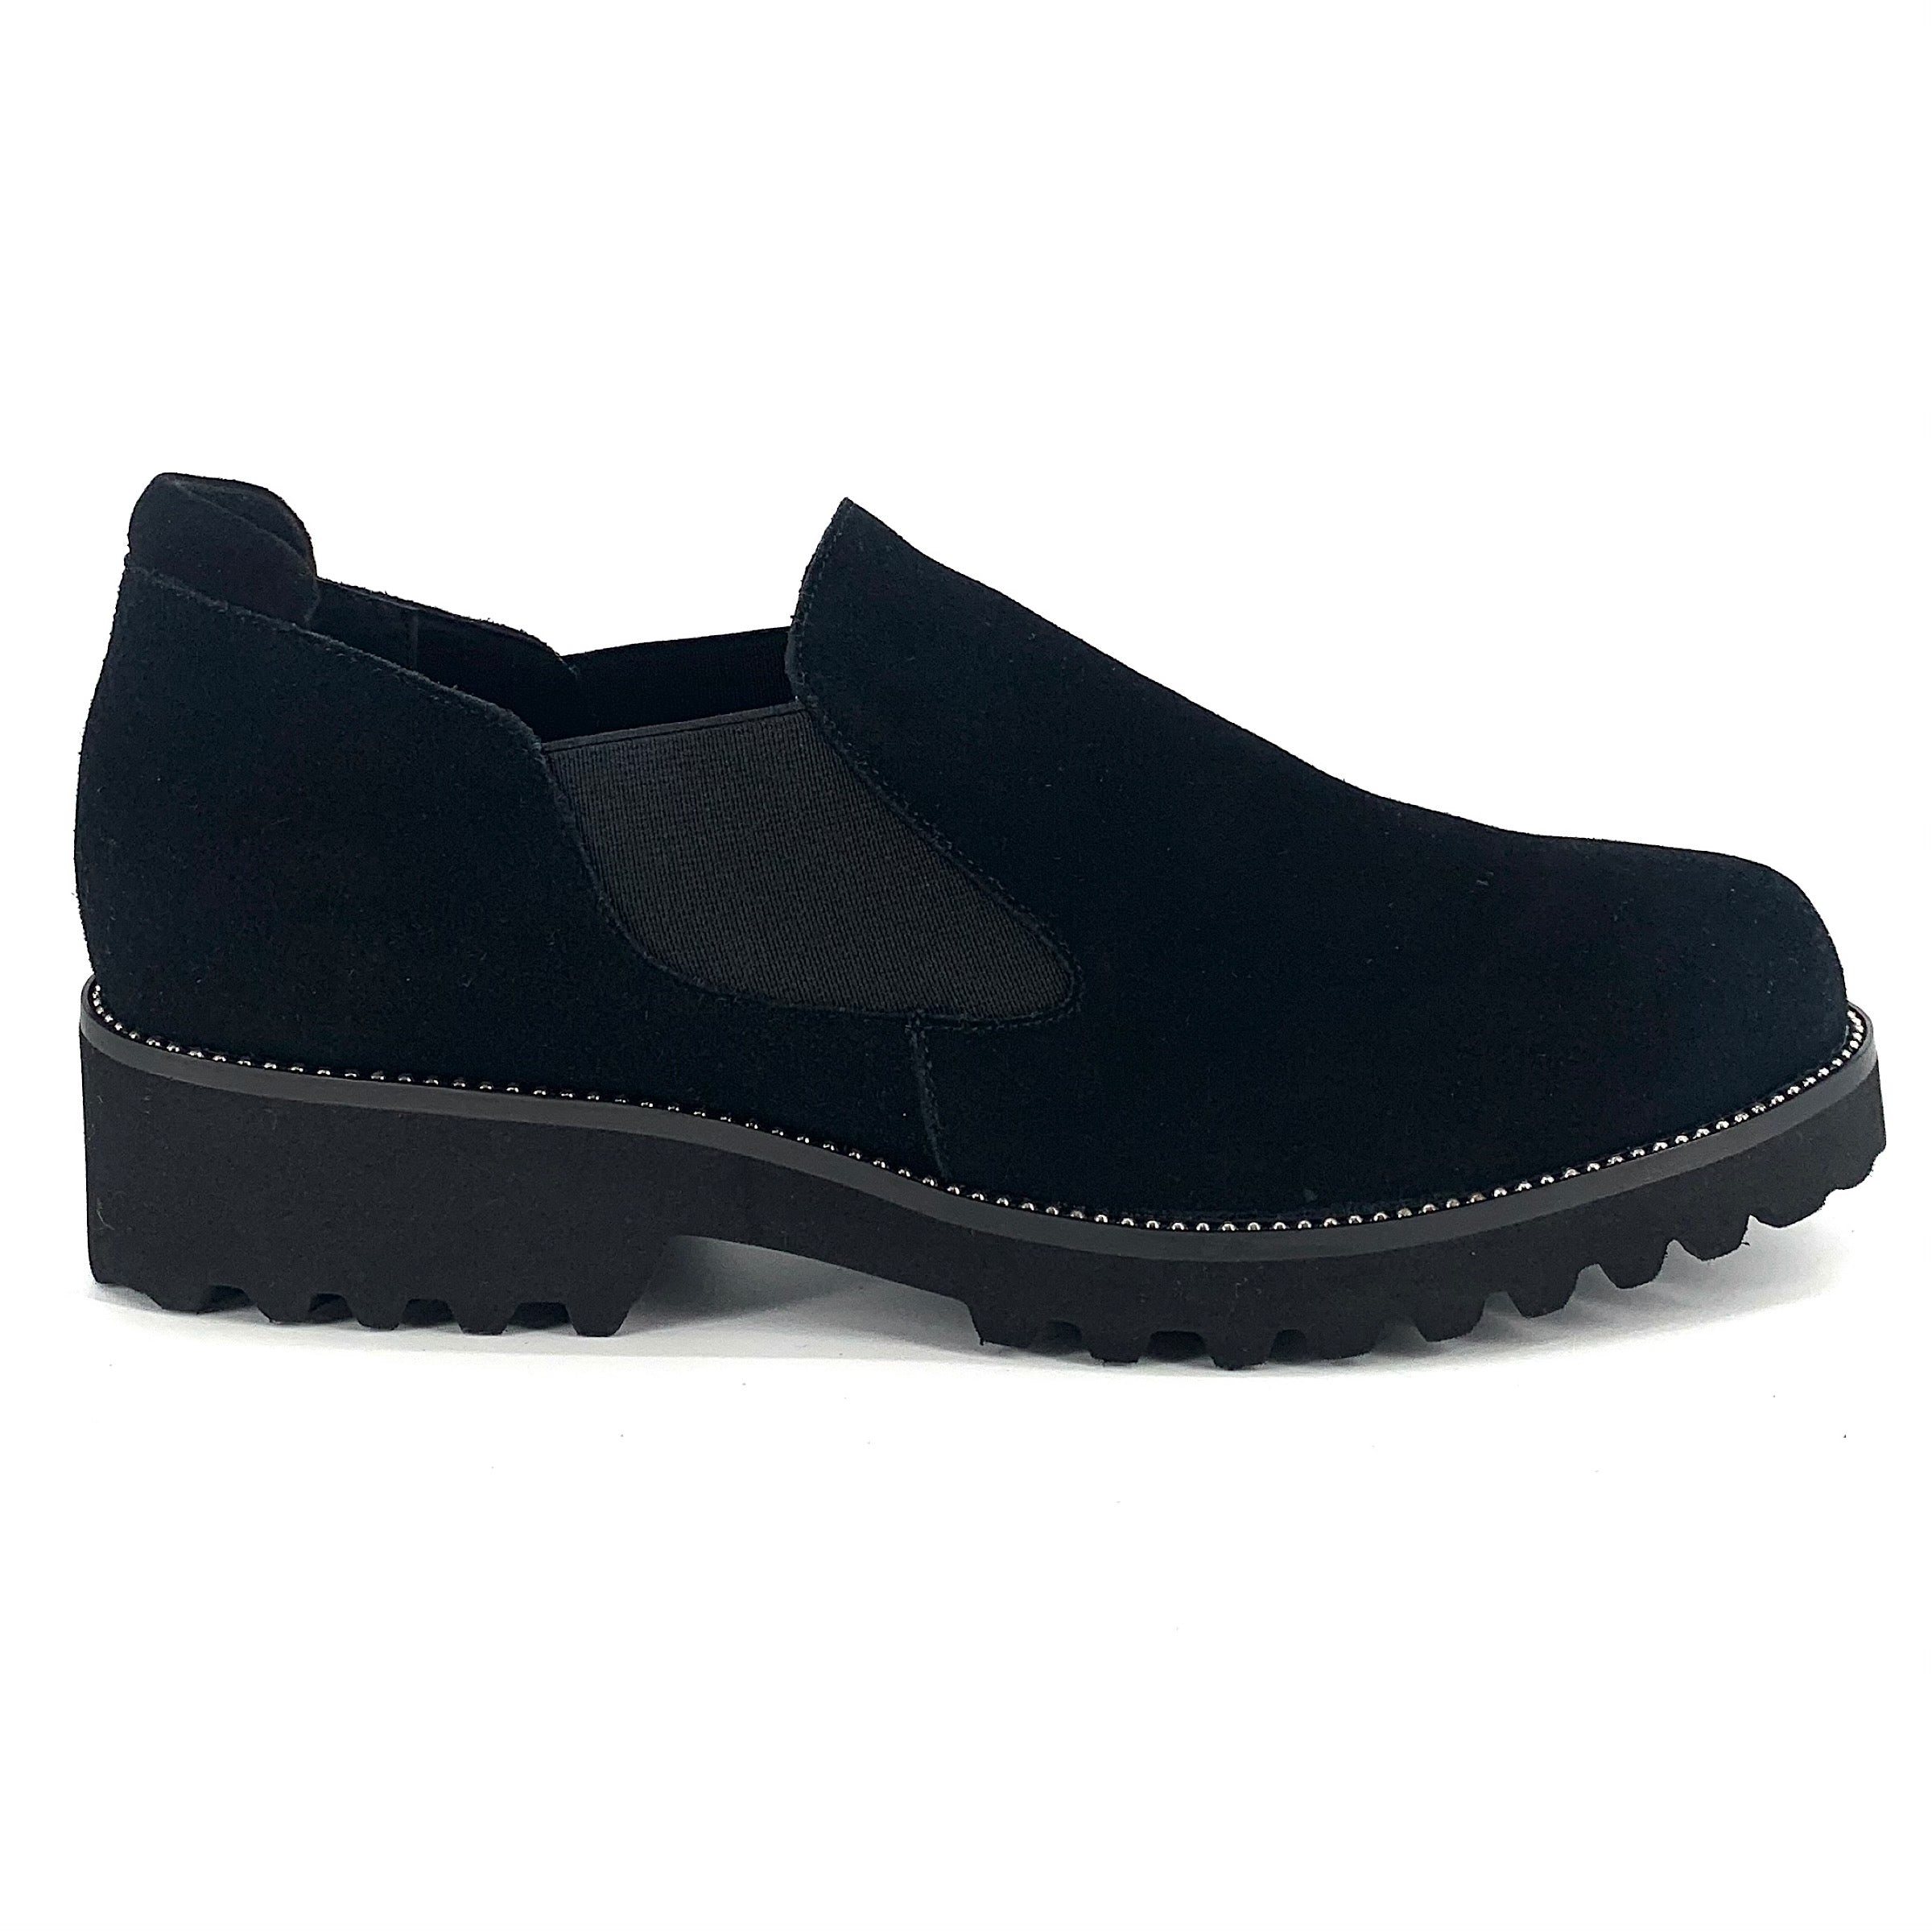 The Weatherproof Slip-On With Ball Chain in Black